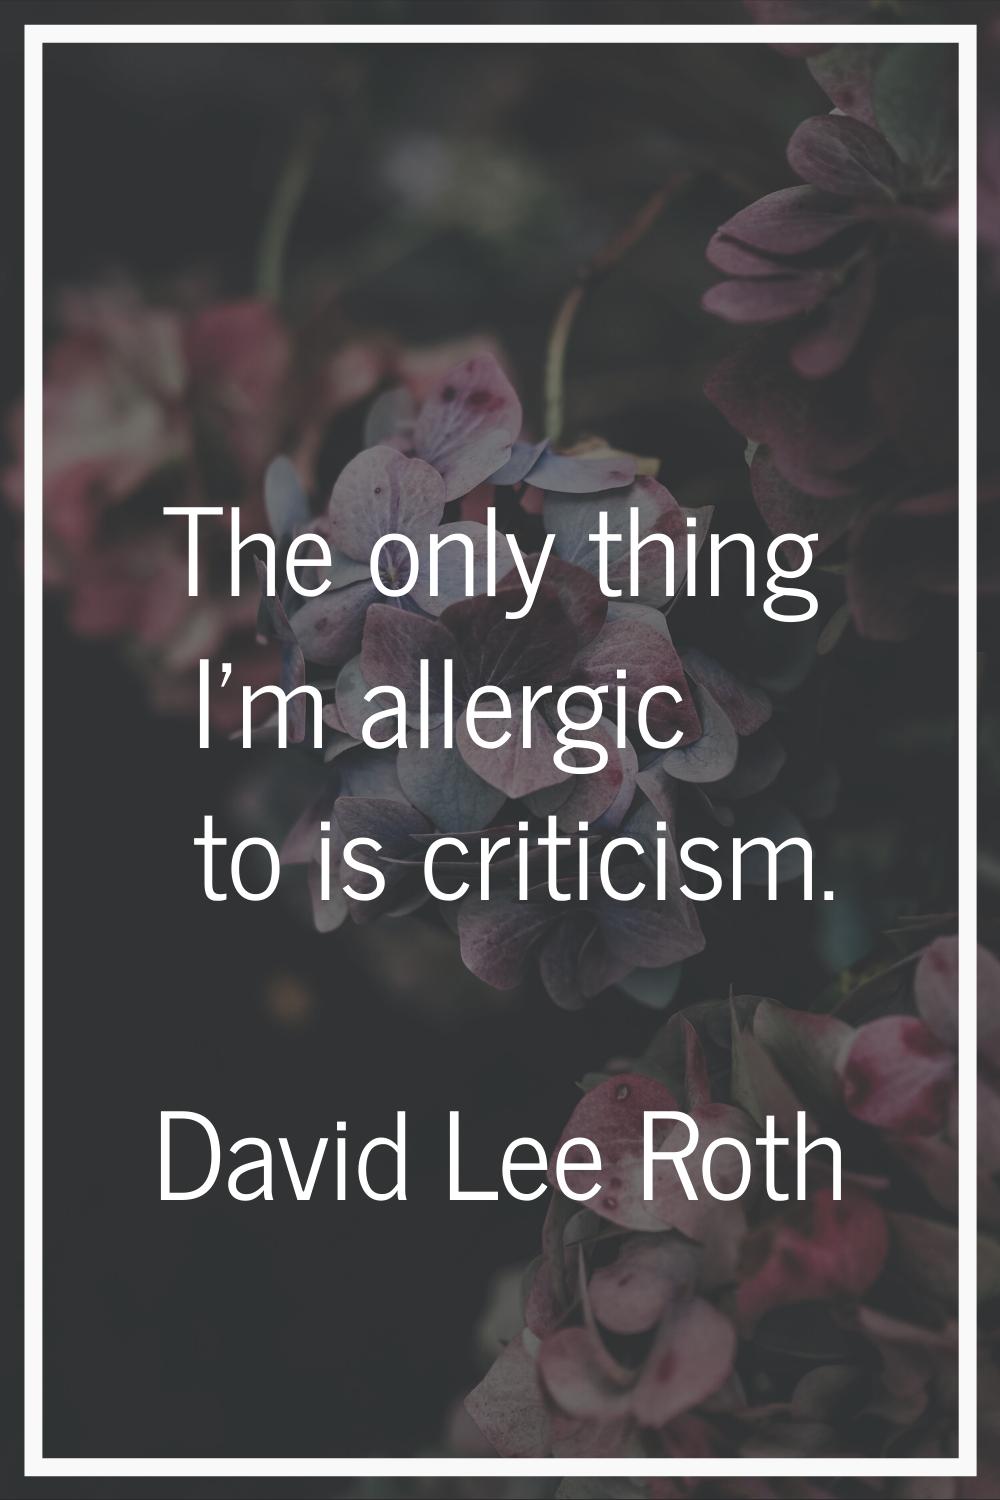 The only thing I'm allergic to is criticism.